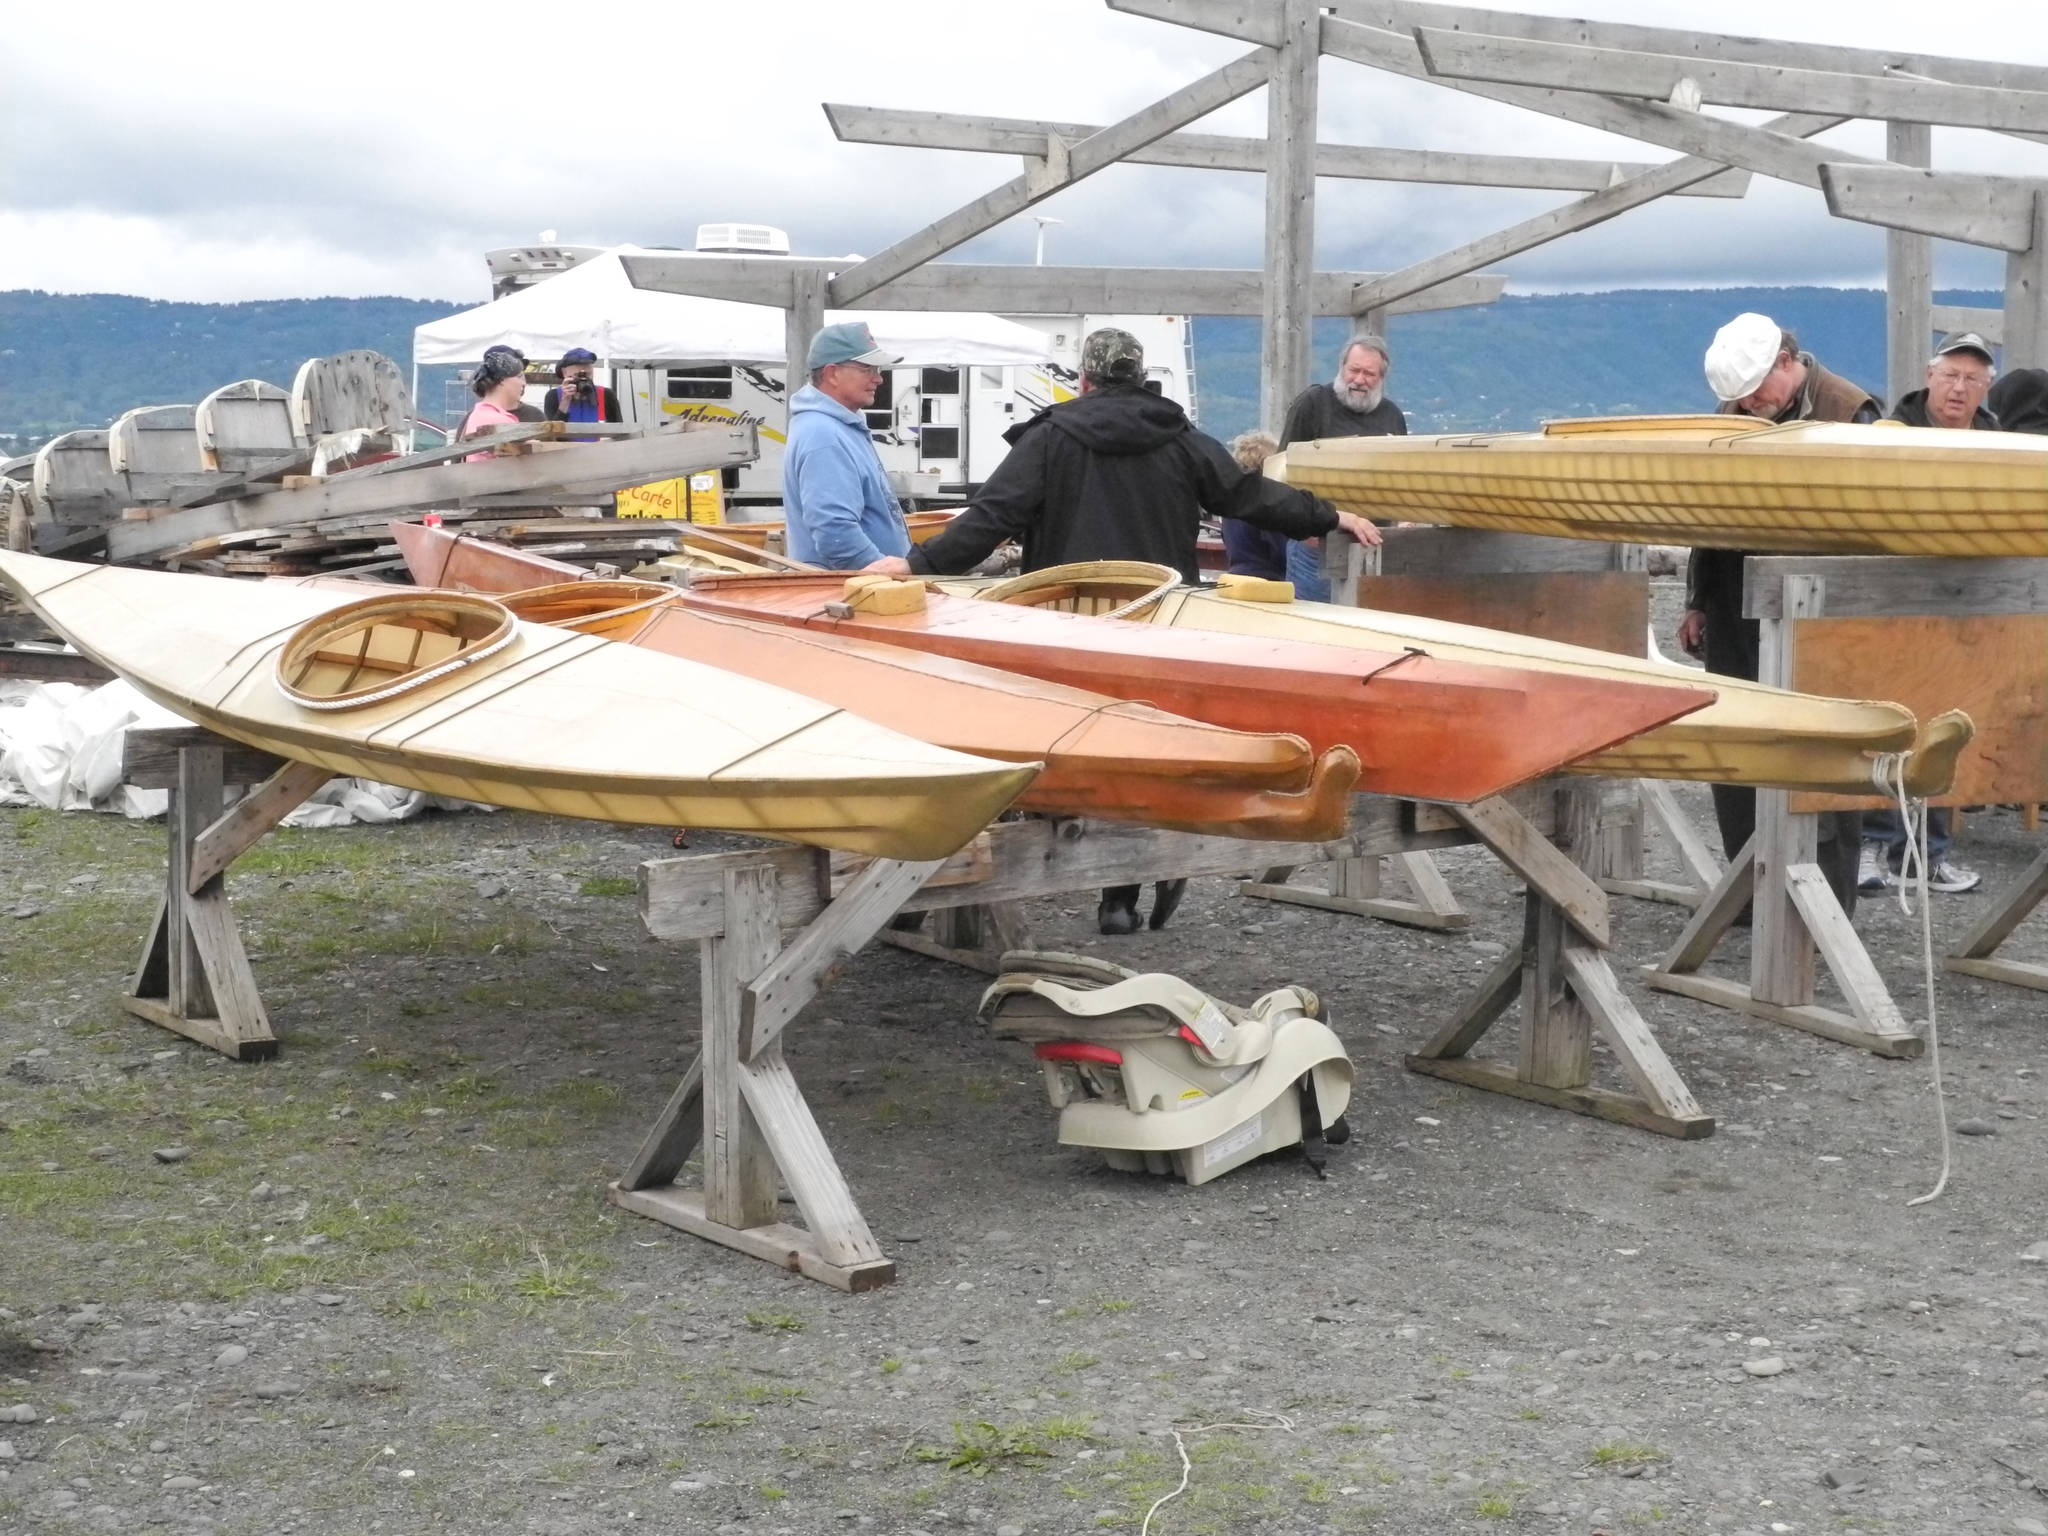 A row of skin kayaks is on display at a previous Kachemak Bay Wooden Boat Festival last Saturday. (Homer News file photo)